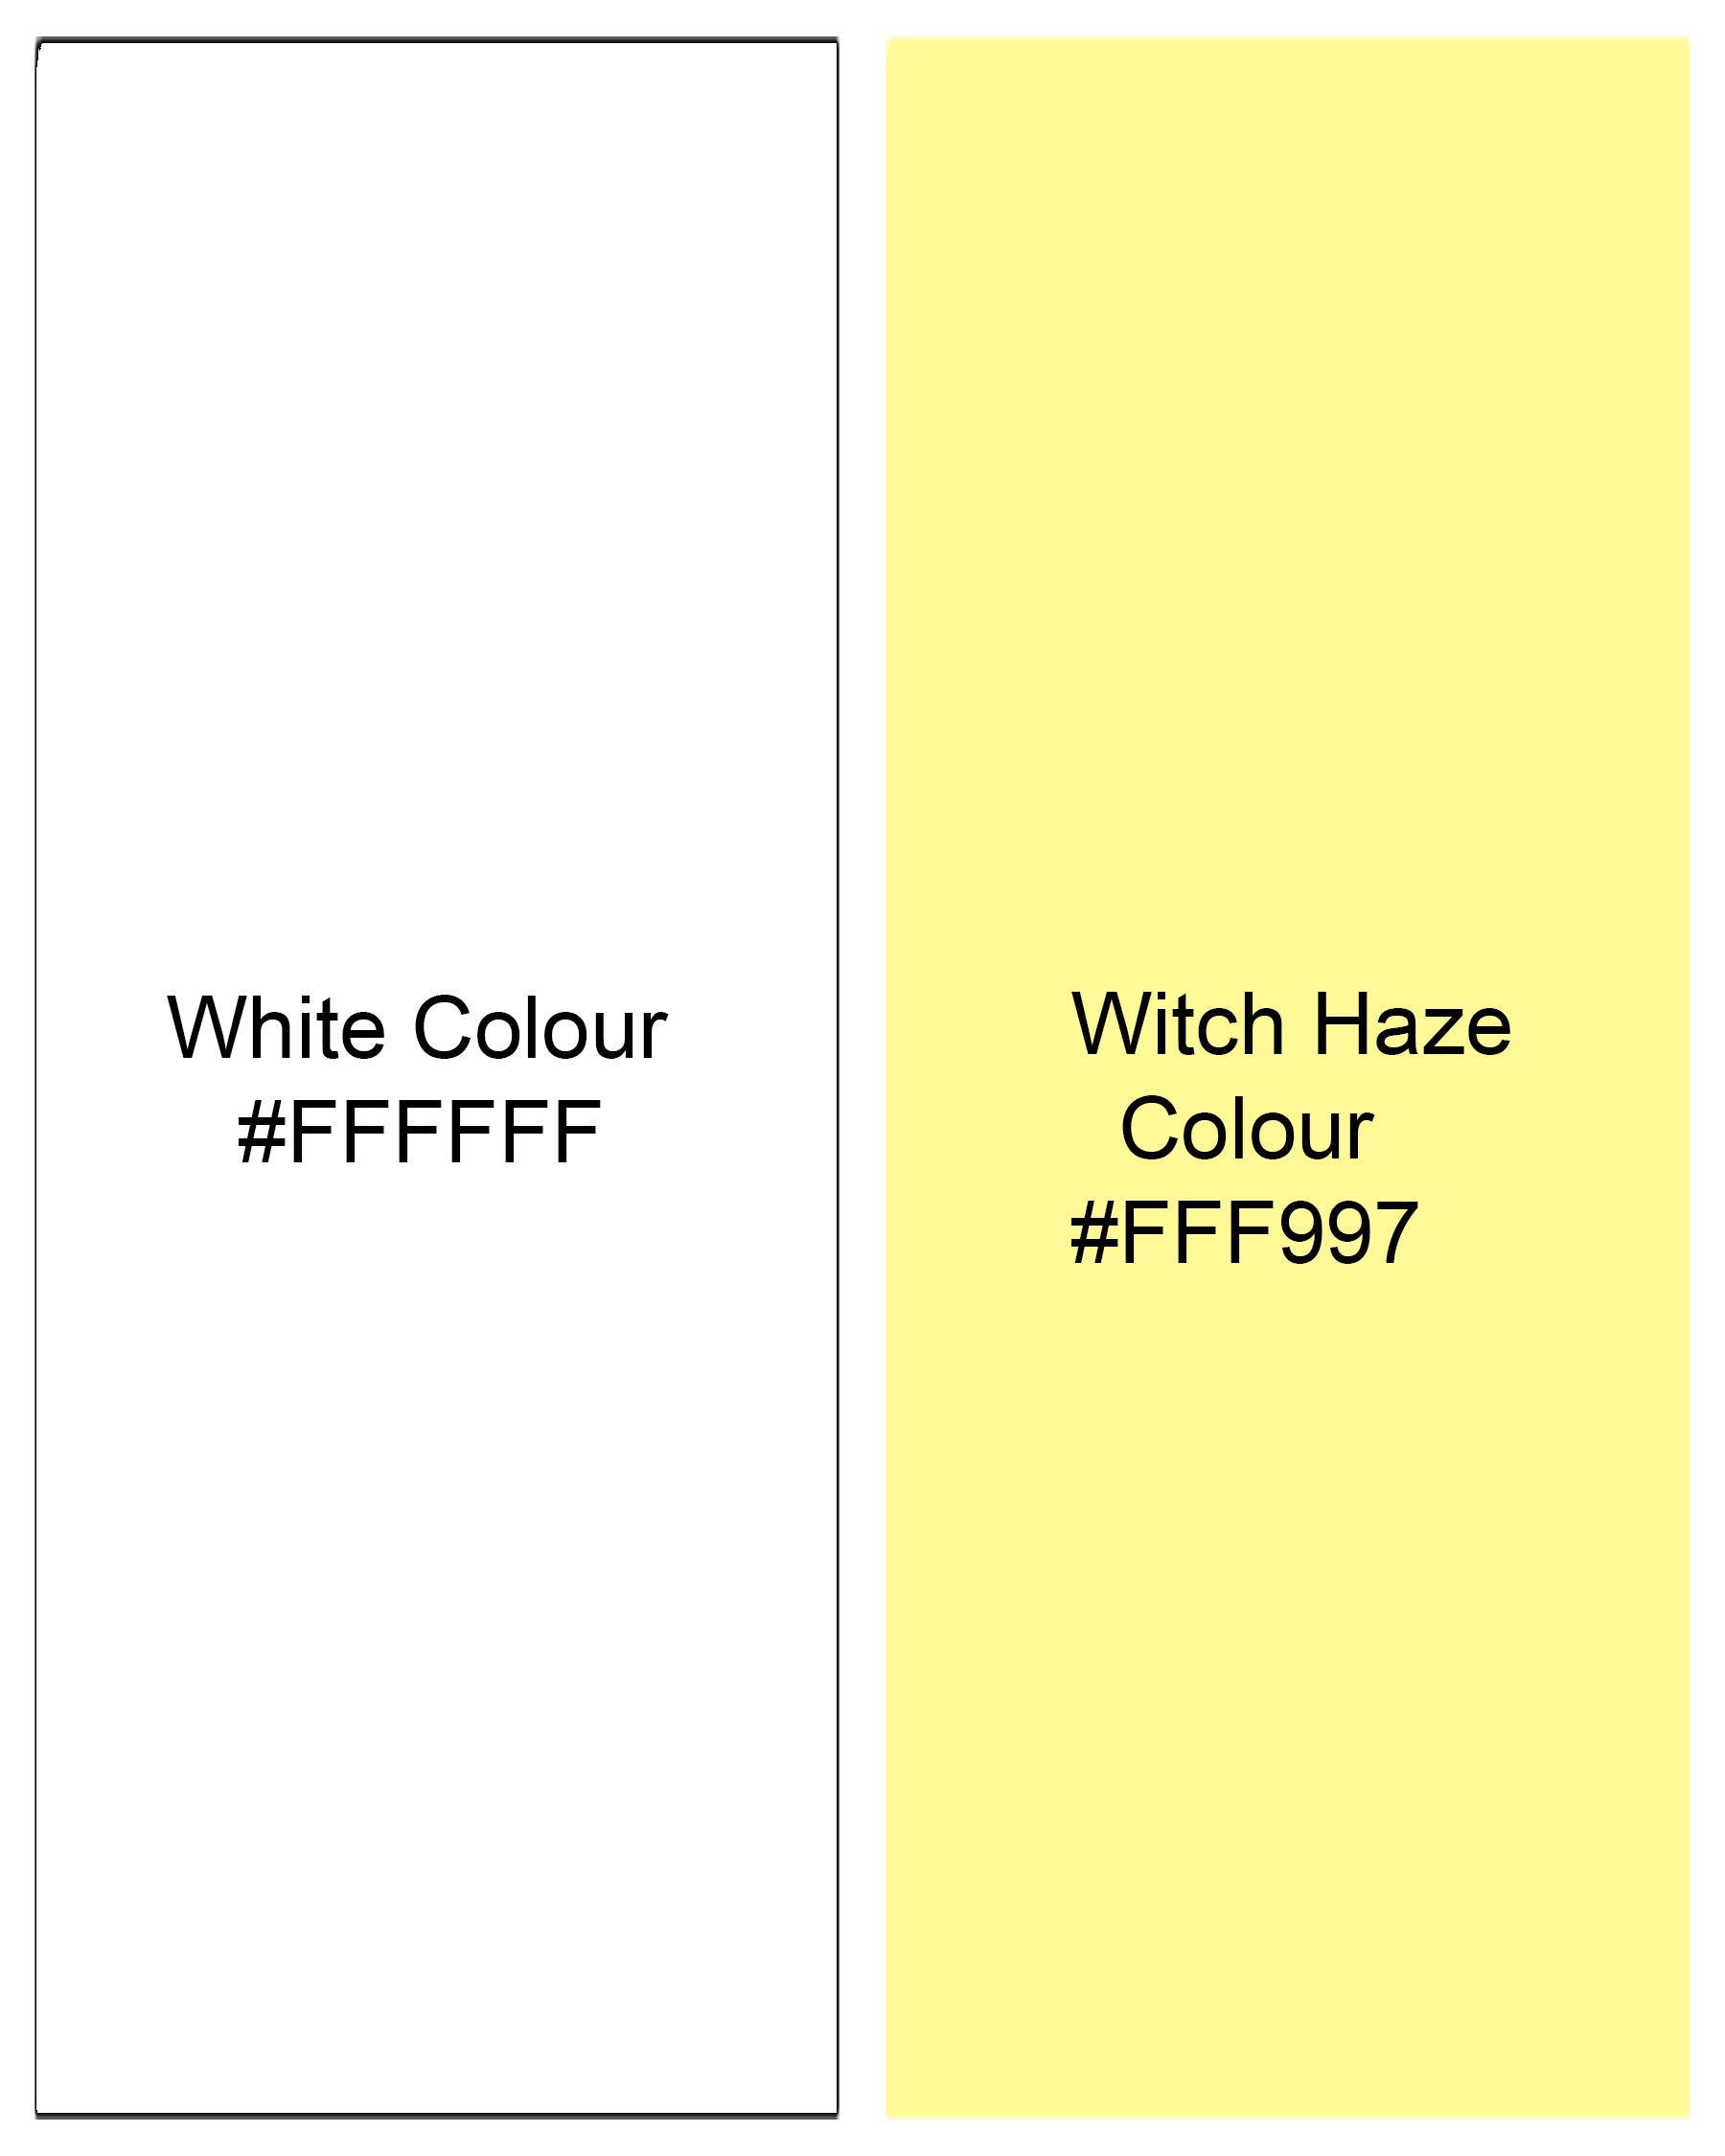 Witch Haze Yellow and White Checker Premium Cotton Shirt 7749-YL-38,7749-YL-38,7749-YL-39,7749-YL-39,7749-YL-40,7749-YL-40,7749-YL-42,7749-YL-42,7749-YL-44,7749-YL-44,7749-YL-46,7749-YL-46,7749-YL-48,7749-YL-48,7749-YL-50,7749-YL-50,7749-YL-52,7749-YL-52